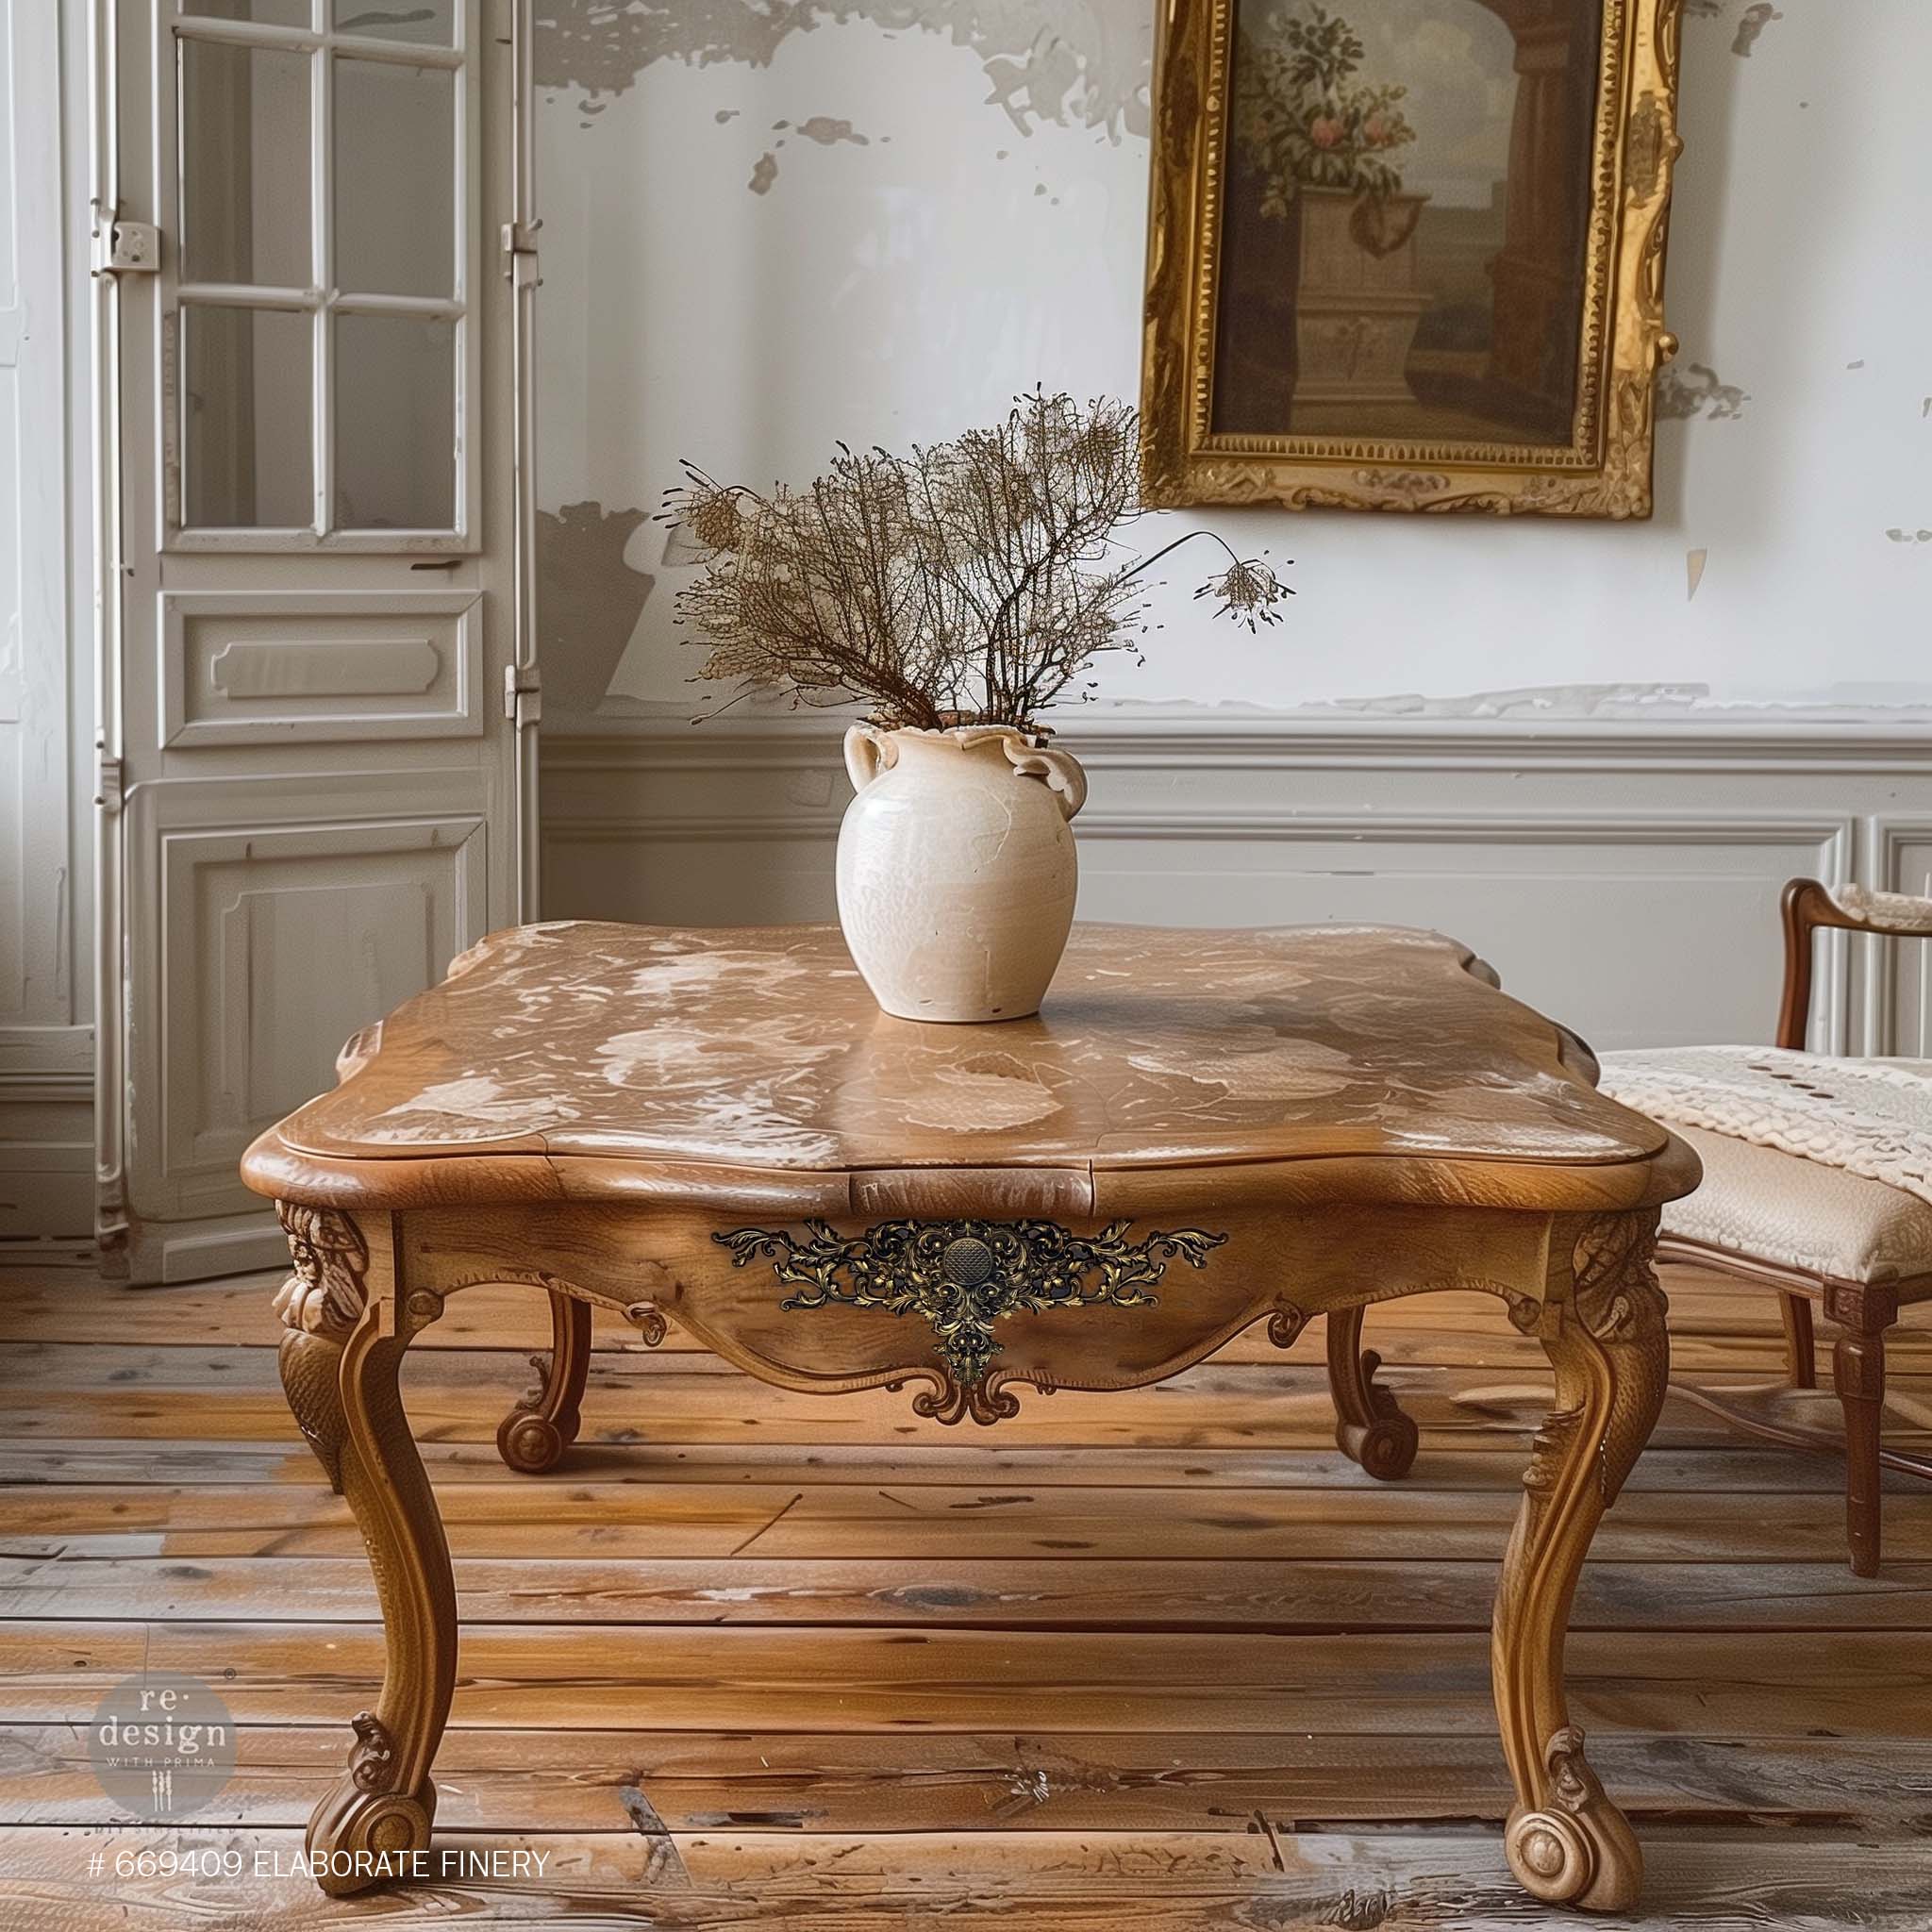 A vintage kitchen table is natural wood and features ReDesign with Prima's Elaborate Finery Decor Poly Casting on a side panel.